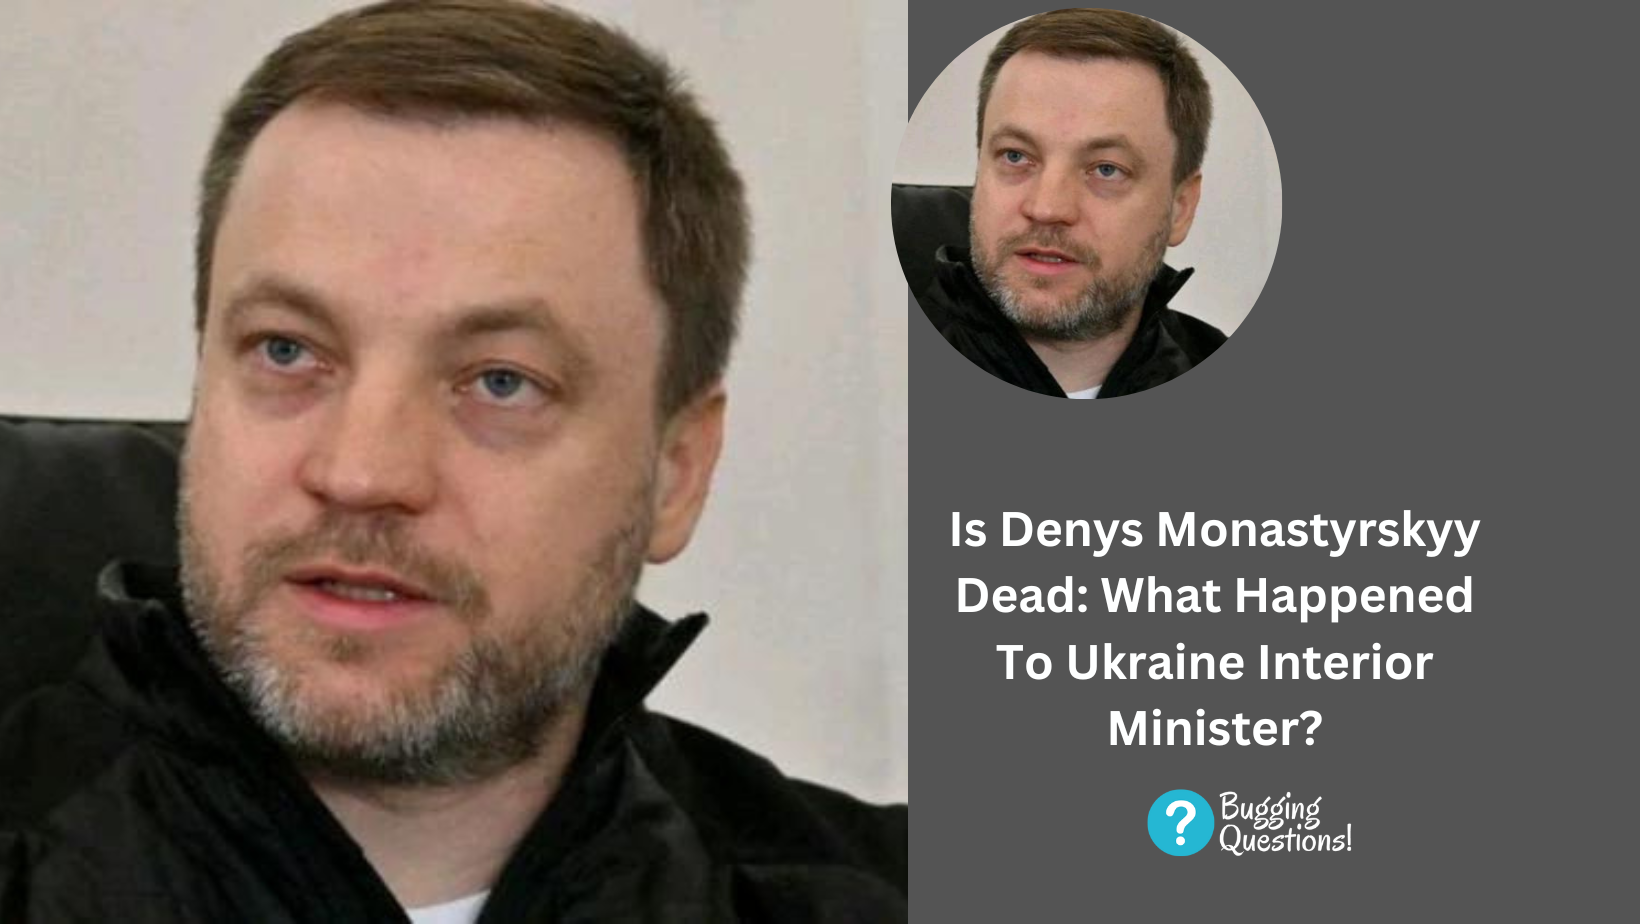 Is Denys Monastyrskyy Dead: What Happened To Ukraine Interior Minister?